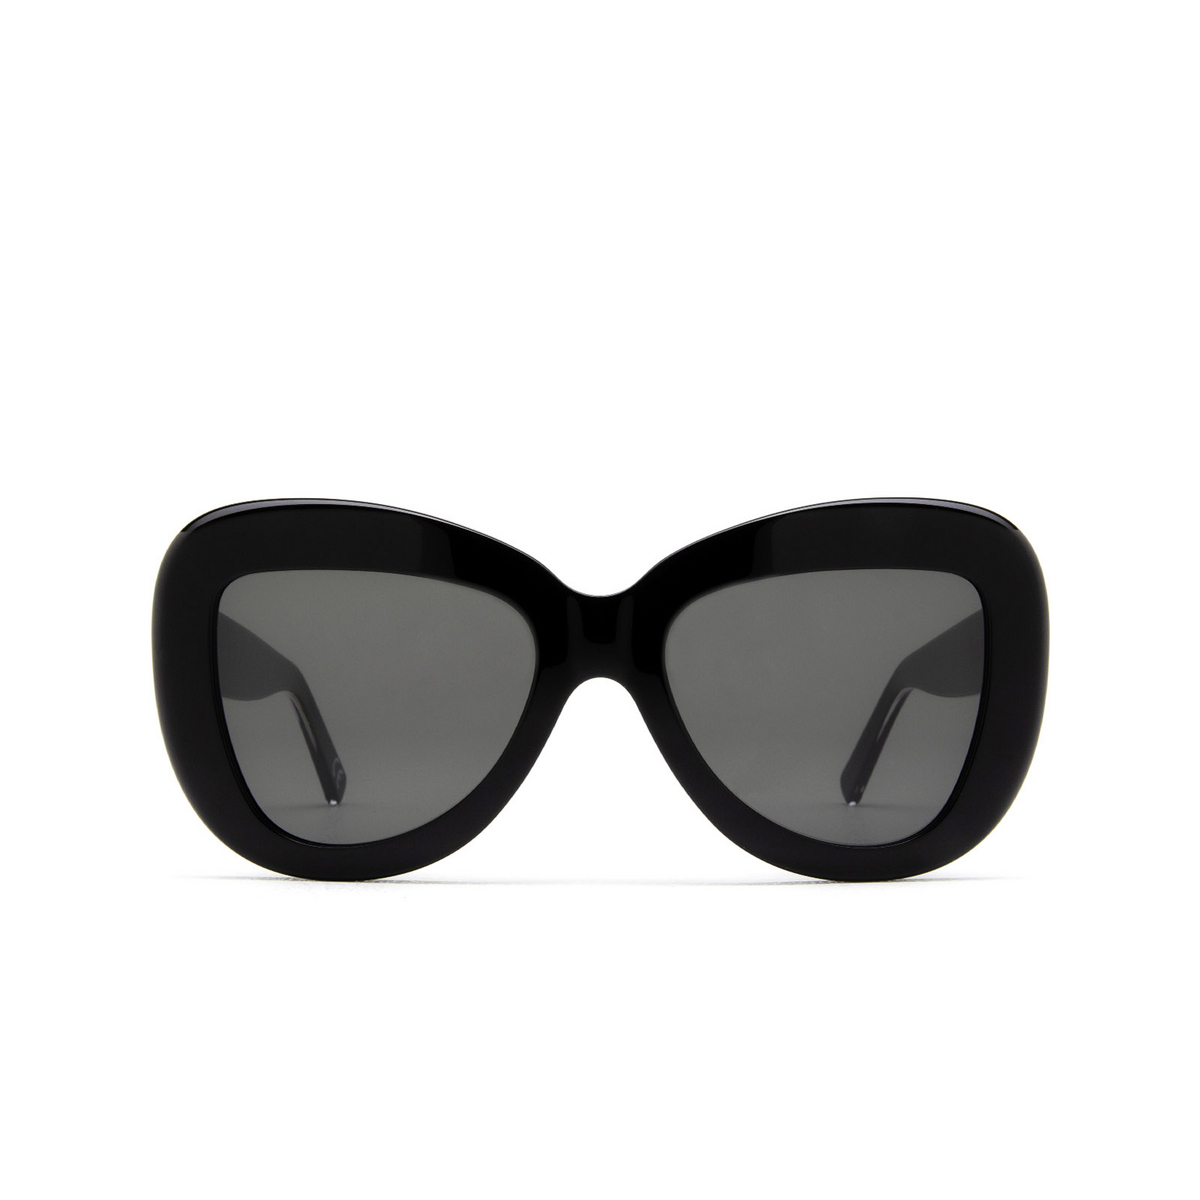 Marni® Butterfly Sunglasses: Elephant Island color Black Ntv - front view.